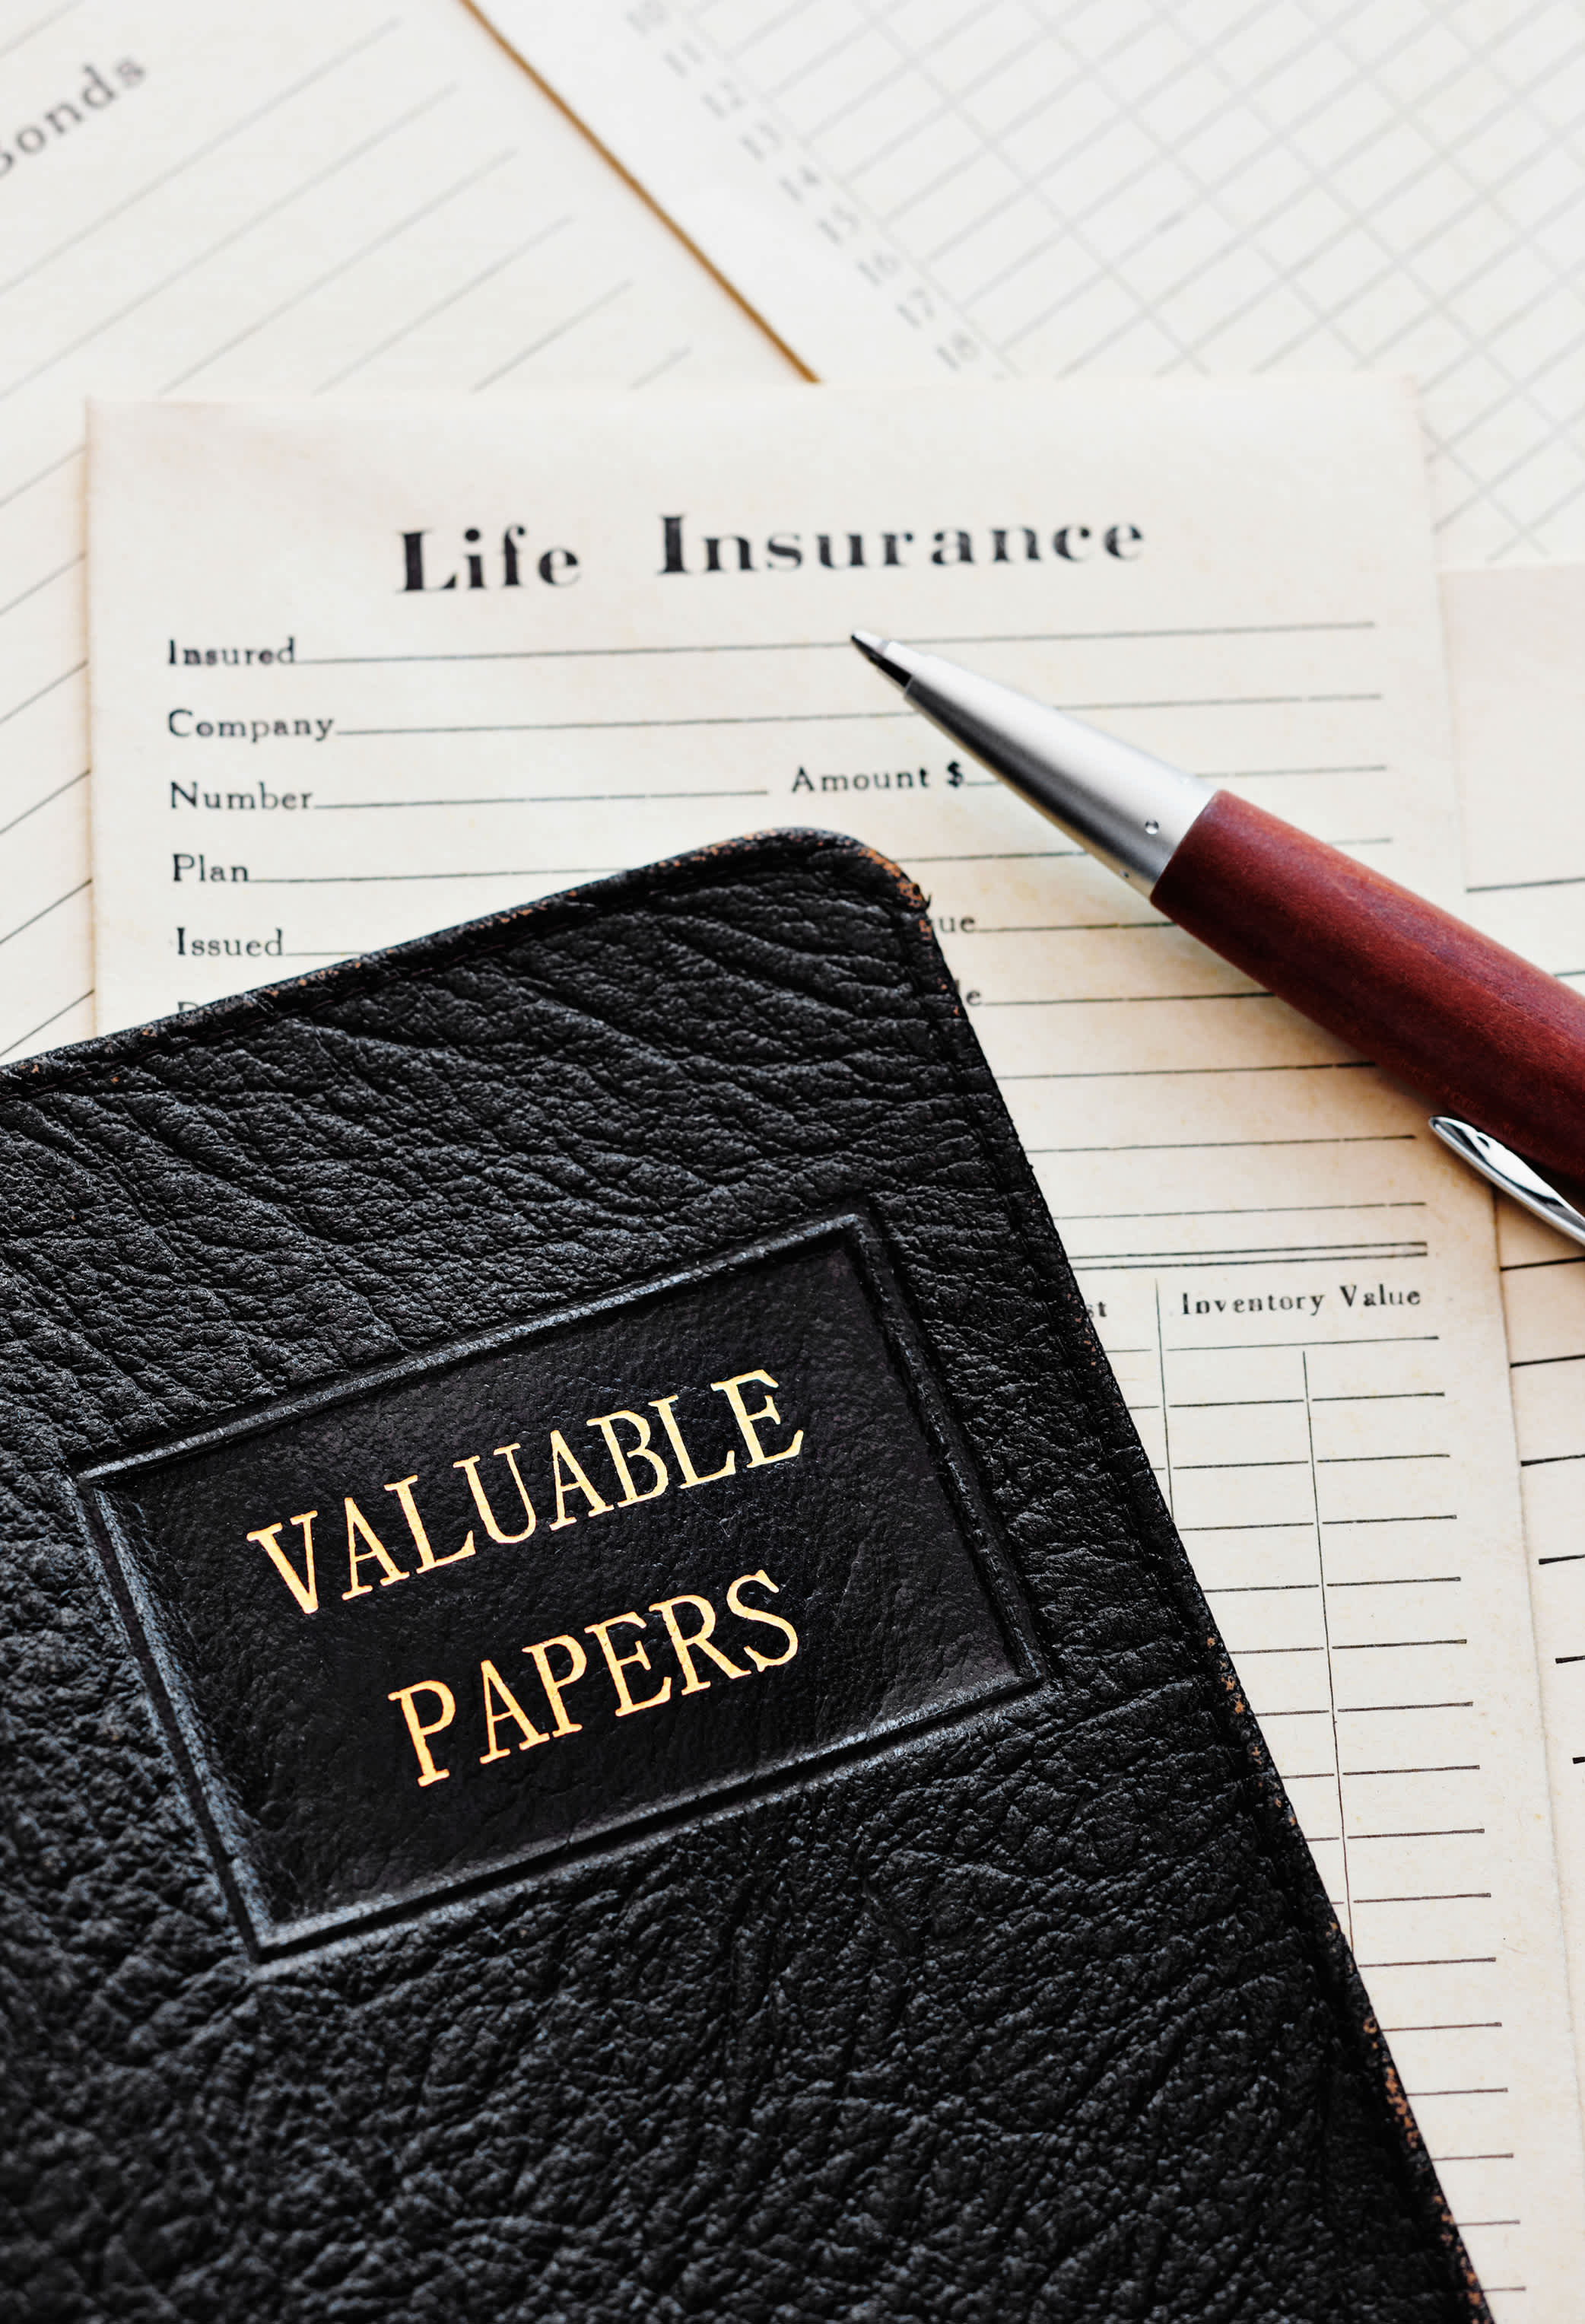 What insurance policies does Crown Life Canada provide?